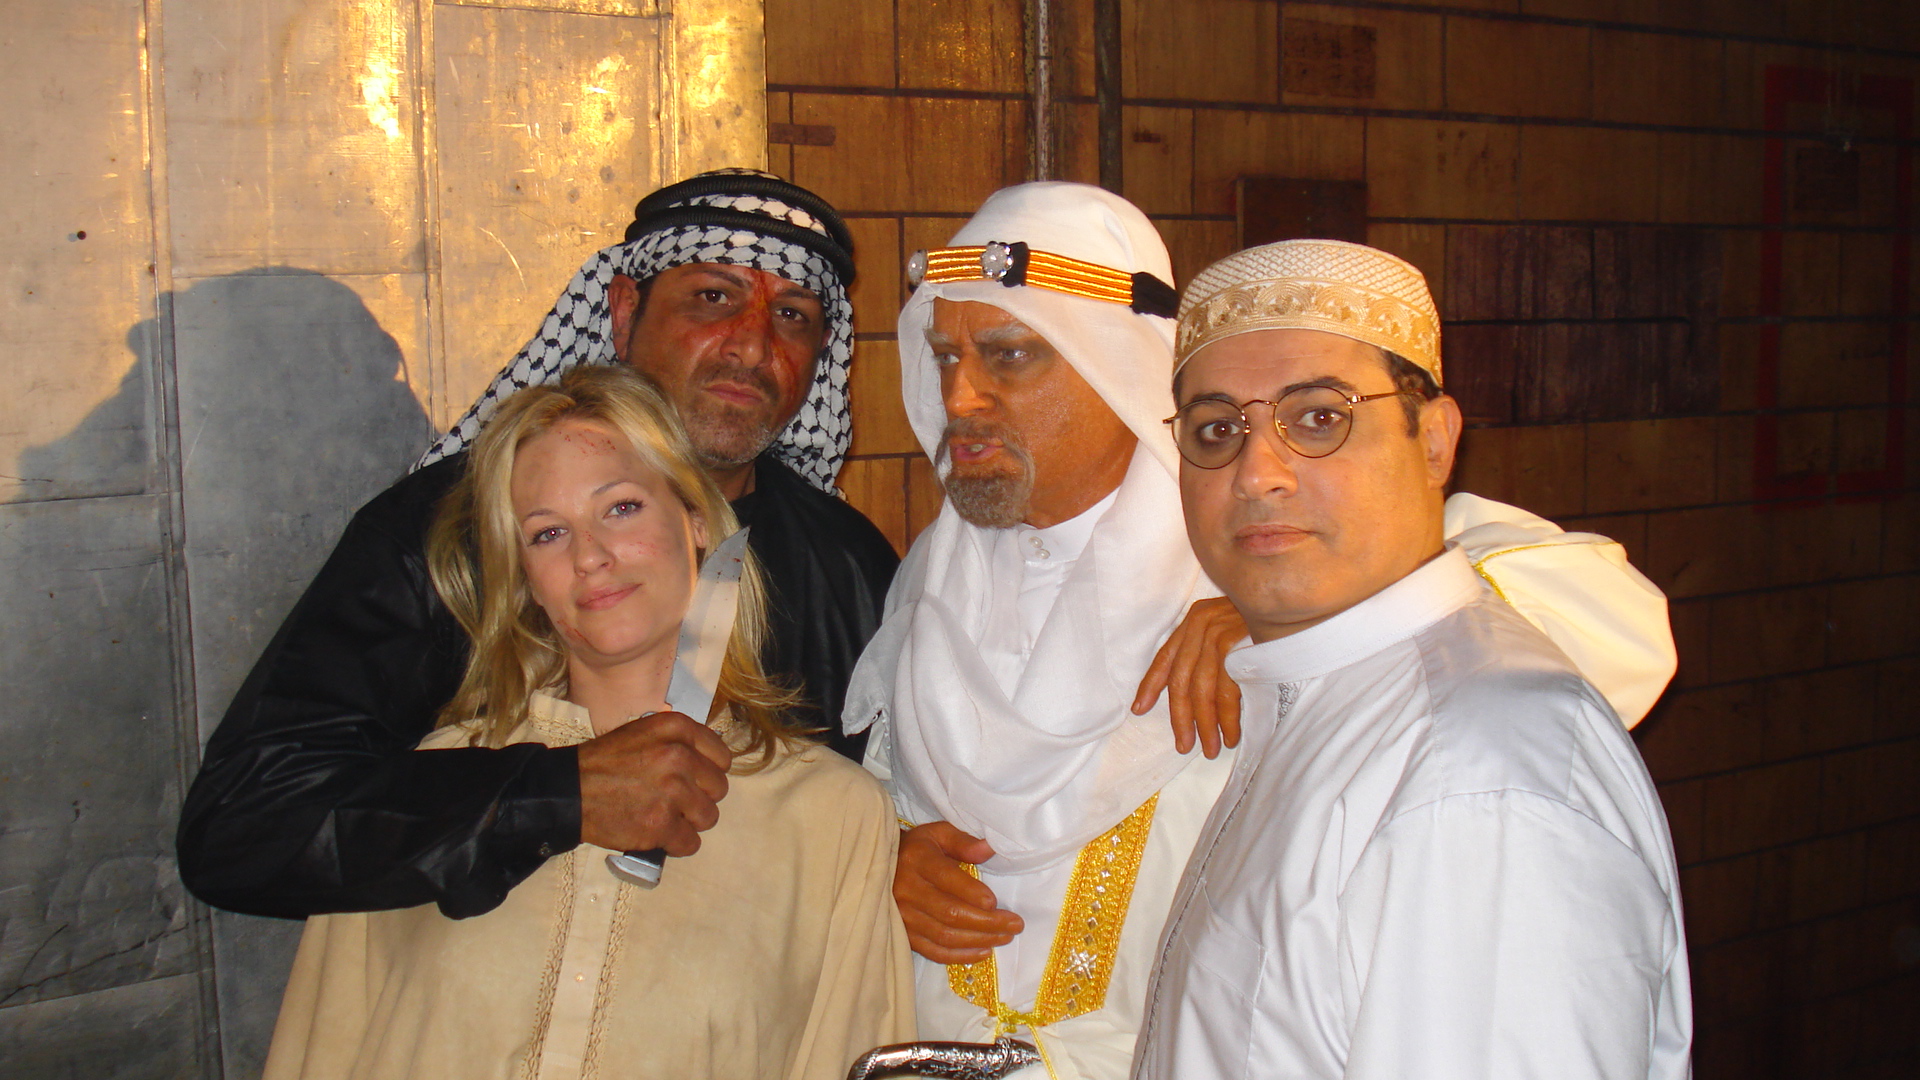 From Left Kristi Clainos, Anthony Batarse, Brad Dourif and Joey Naber In a new dark comedy set for release in 2008